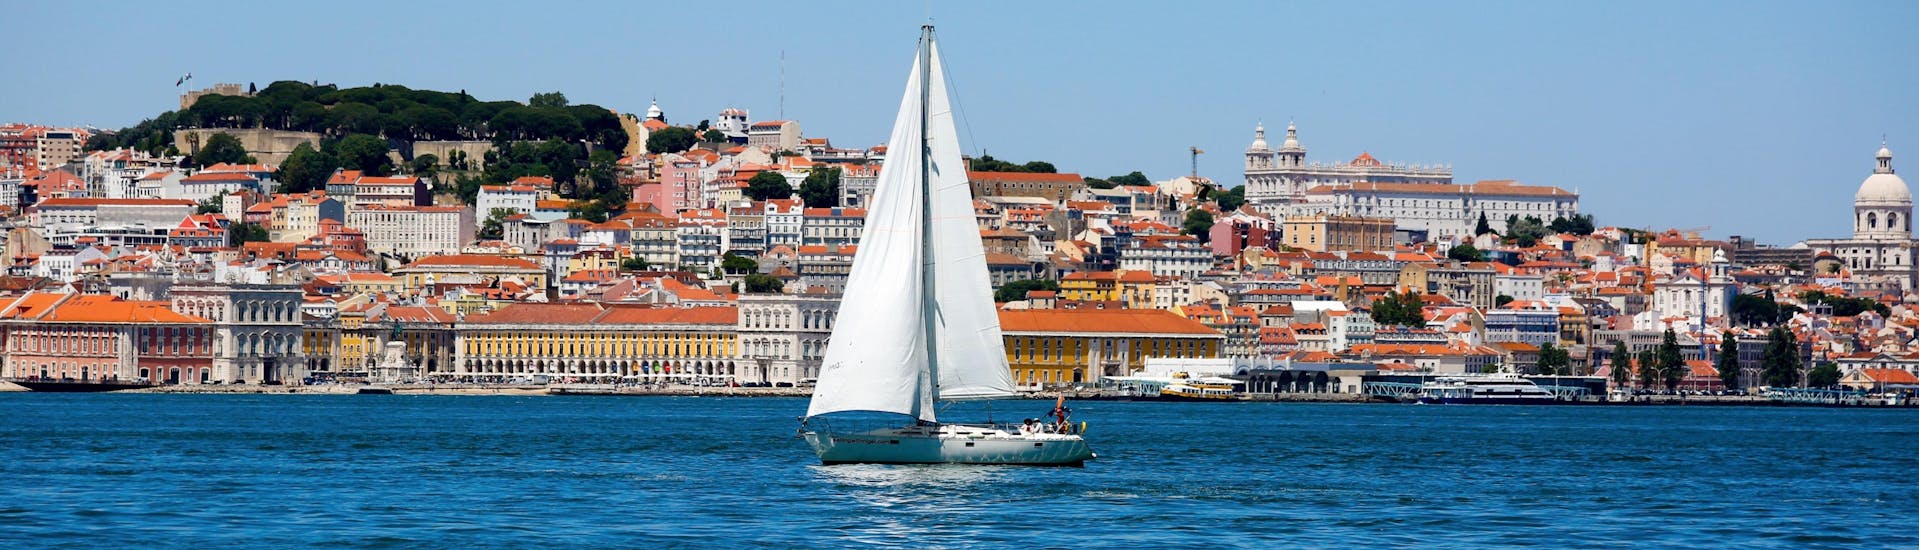 An image of a sailing boat drifting along the Tagus River during a boat trip in Lisbon.